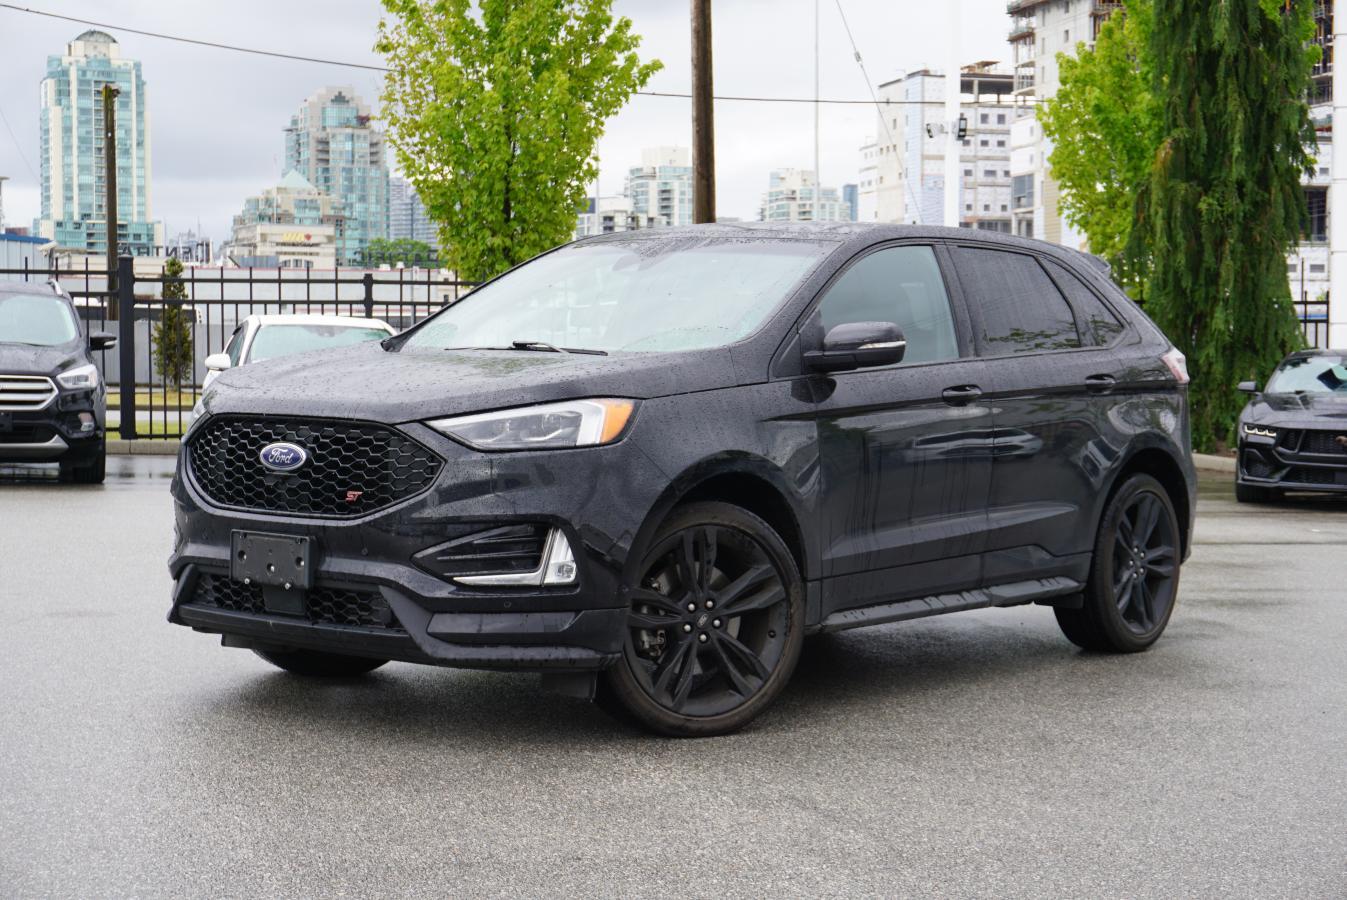 2019 Ford Edge St, Panoramic Roof